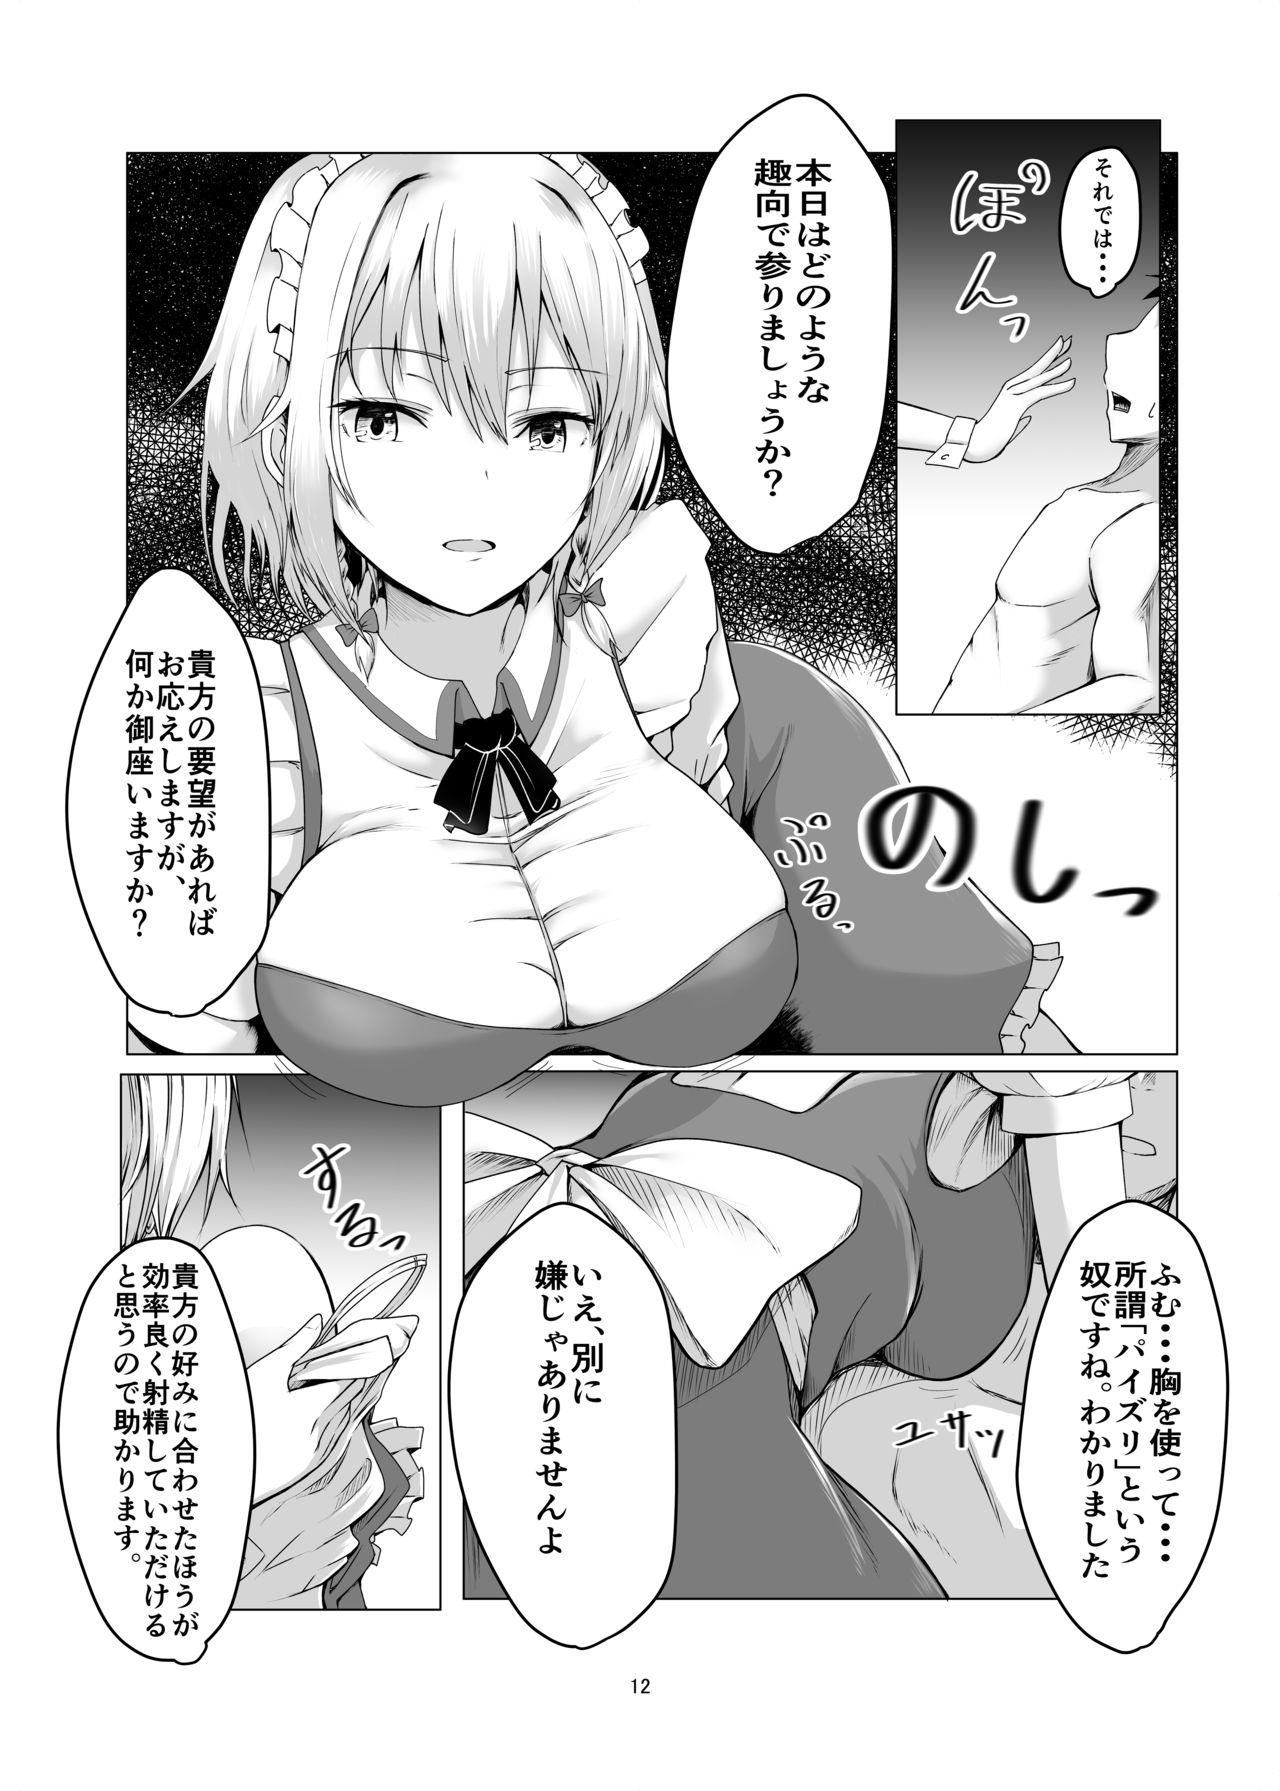 Argentino 咲夜さんに淡々と搾精されるマンガ - Touhou project Dildo - Page 11